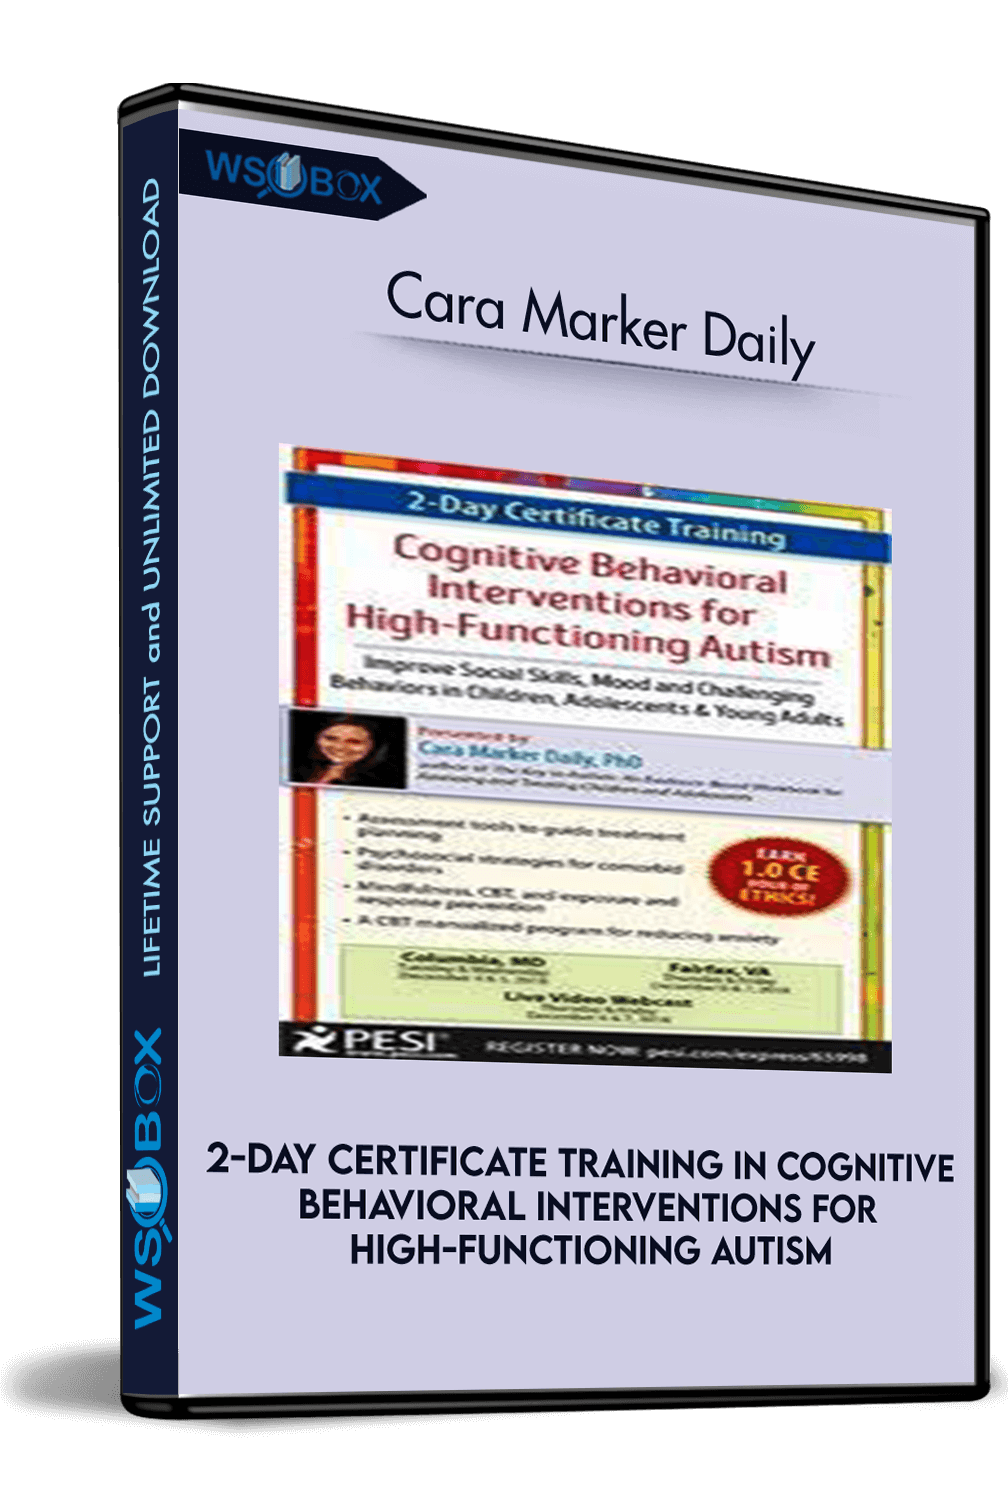 2-day-certificate-training-in-cognitive-behavioral-interventions-for-high-functioning-autism-improve-social-skills-mood-and-challenging-behaviors-in-children-adolescents-young-adults-cara-marker-daily